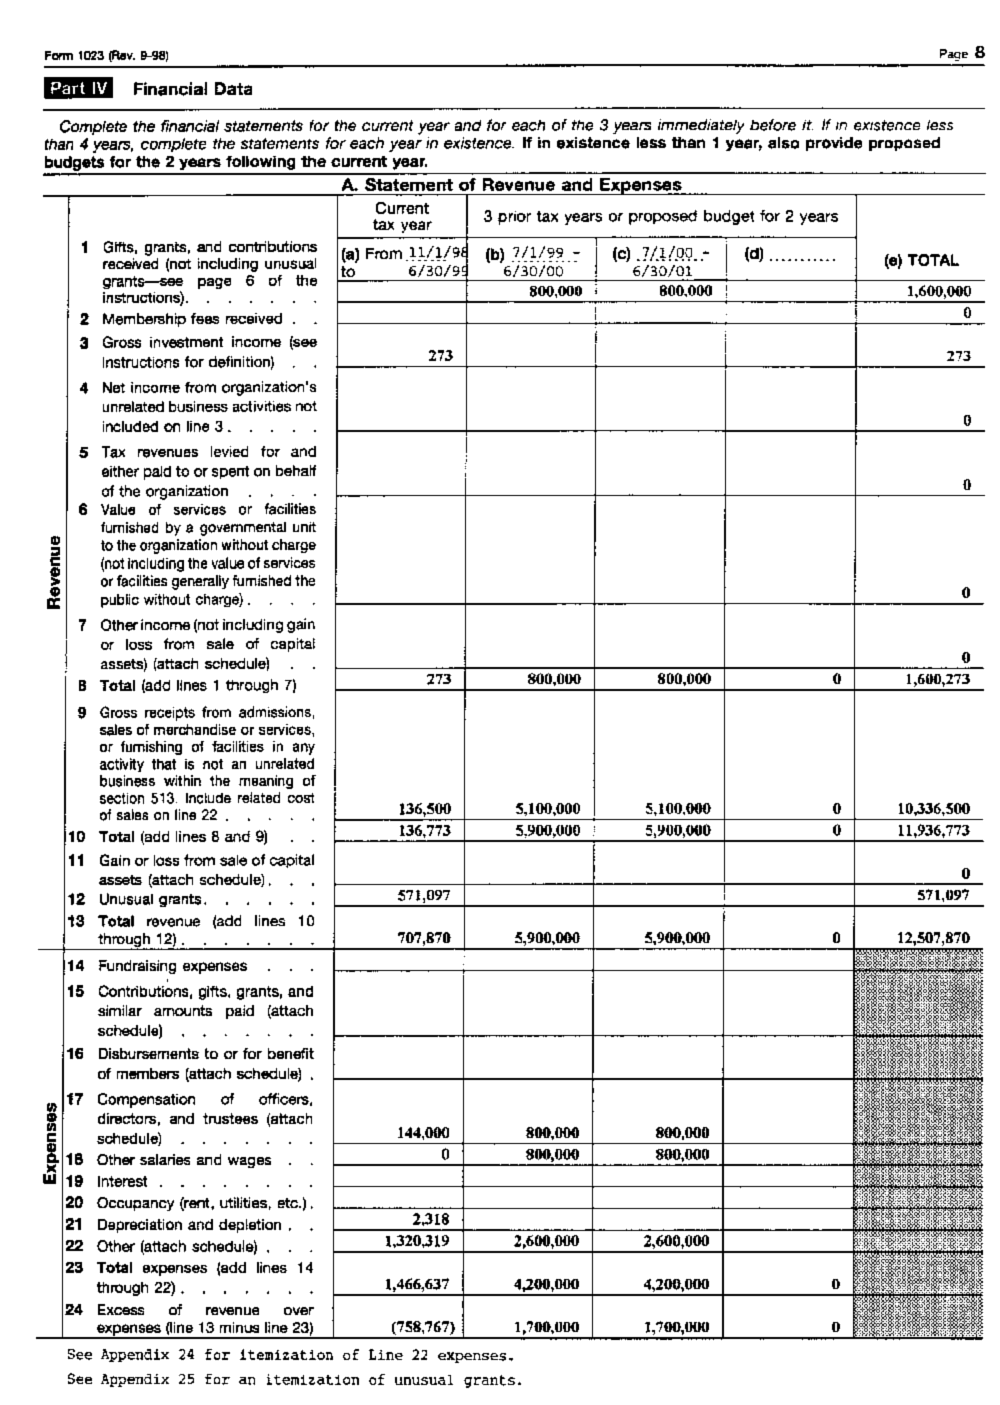 Form 1023 Application For Recognition of Exemption